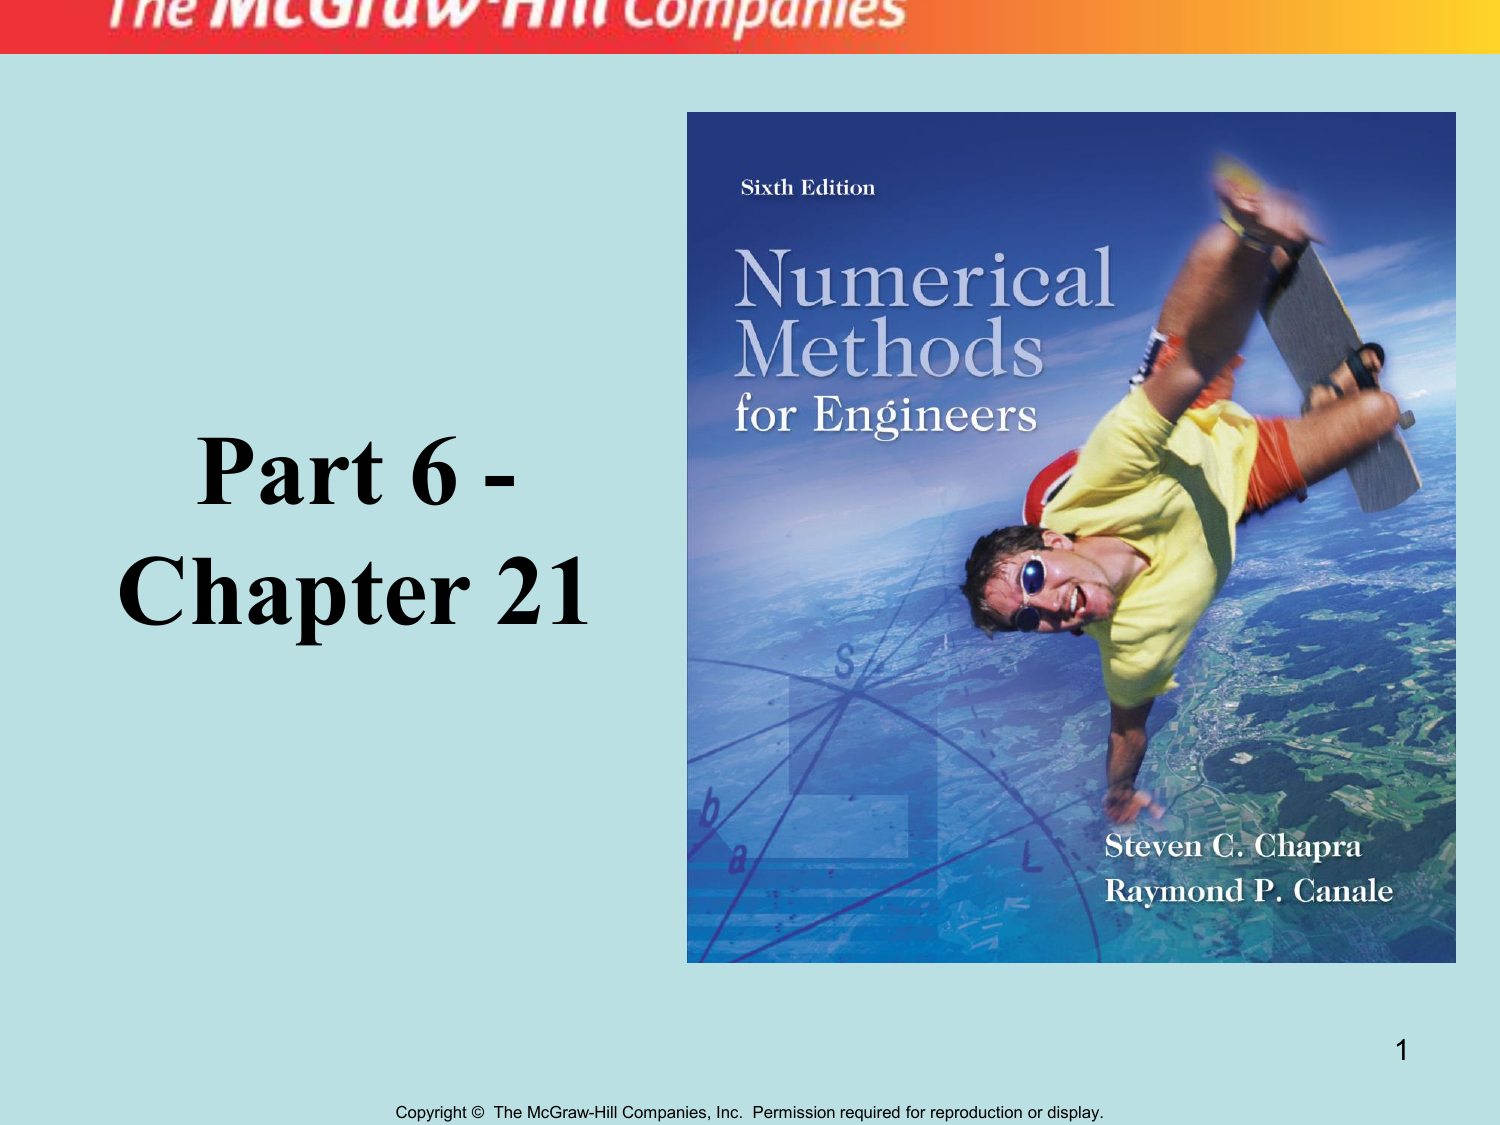 Applied numerical methods with Matlab for Engineers and Scientists Steven c. Chapra. Numerical methods for Scientists and Engineers, r. w. Hamming содержание. Numerical methods reihstmayer. Numerical methods